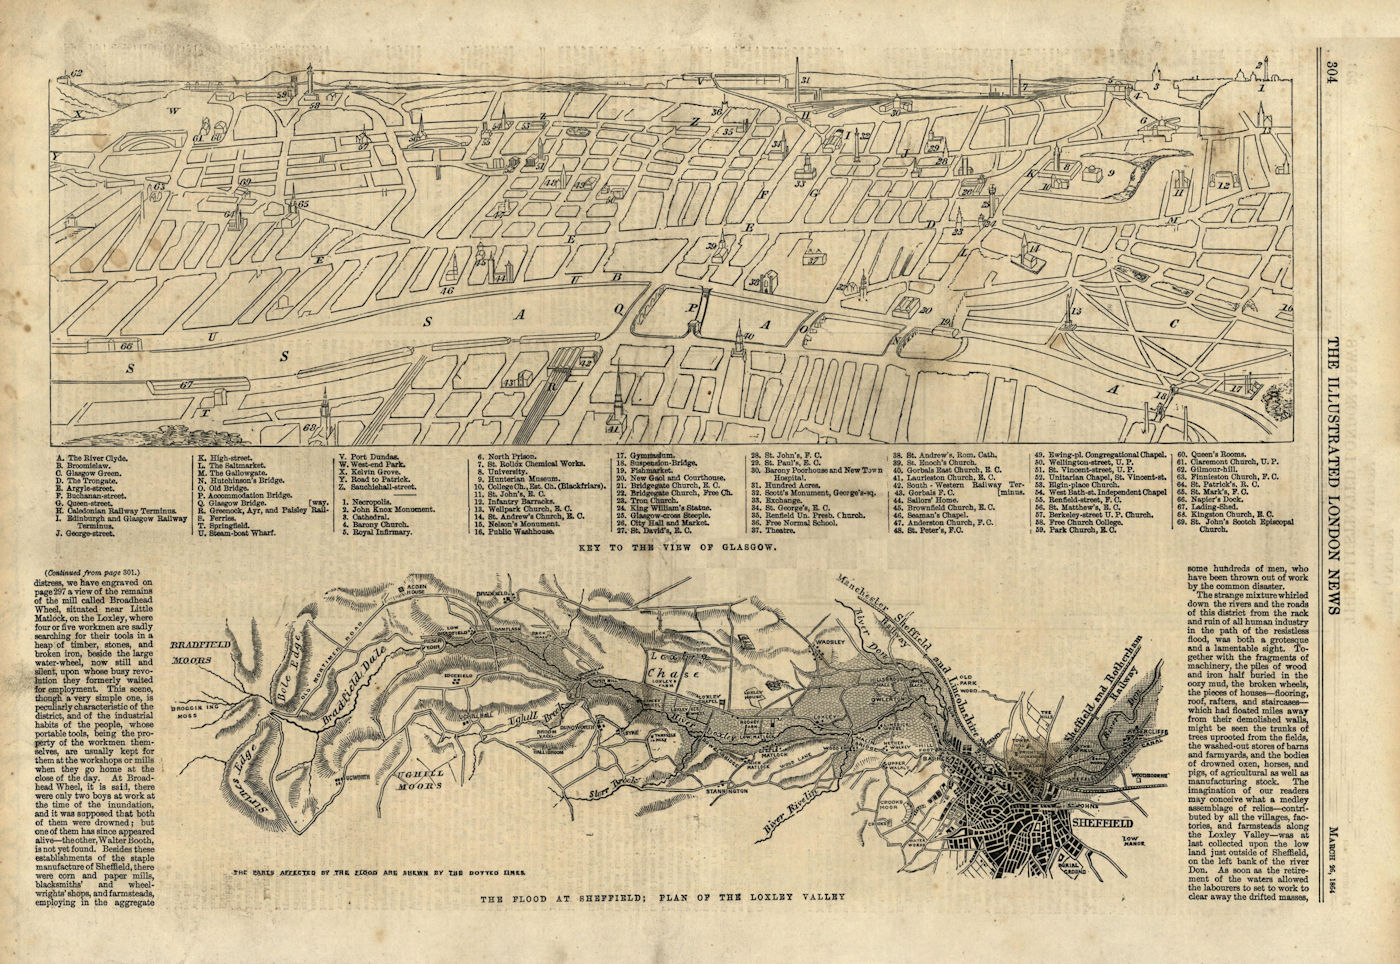 Key to the view of Glasgow. The Flood at Sheffield: Loxley Valley plan 1864 map